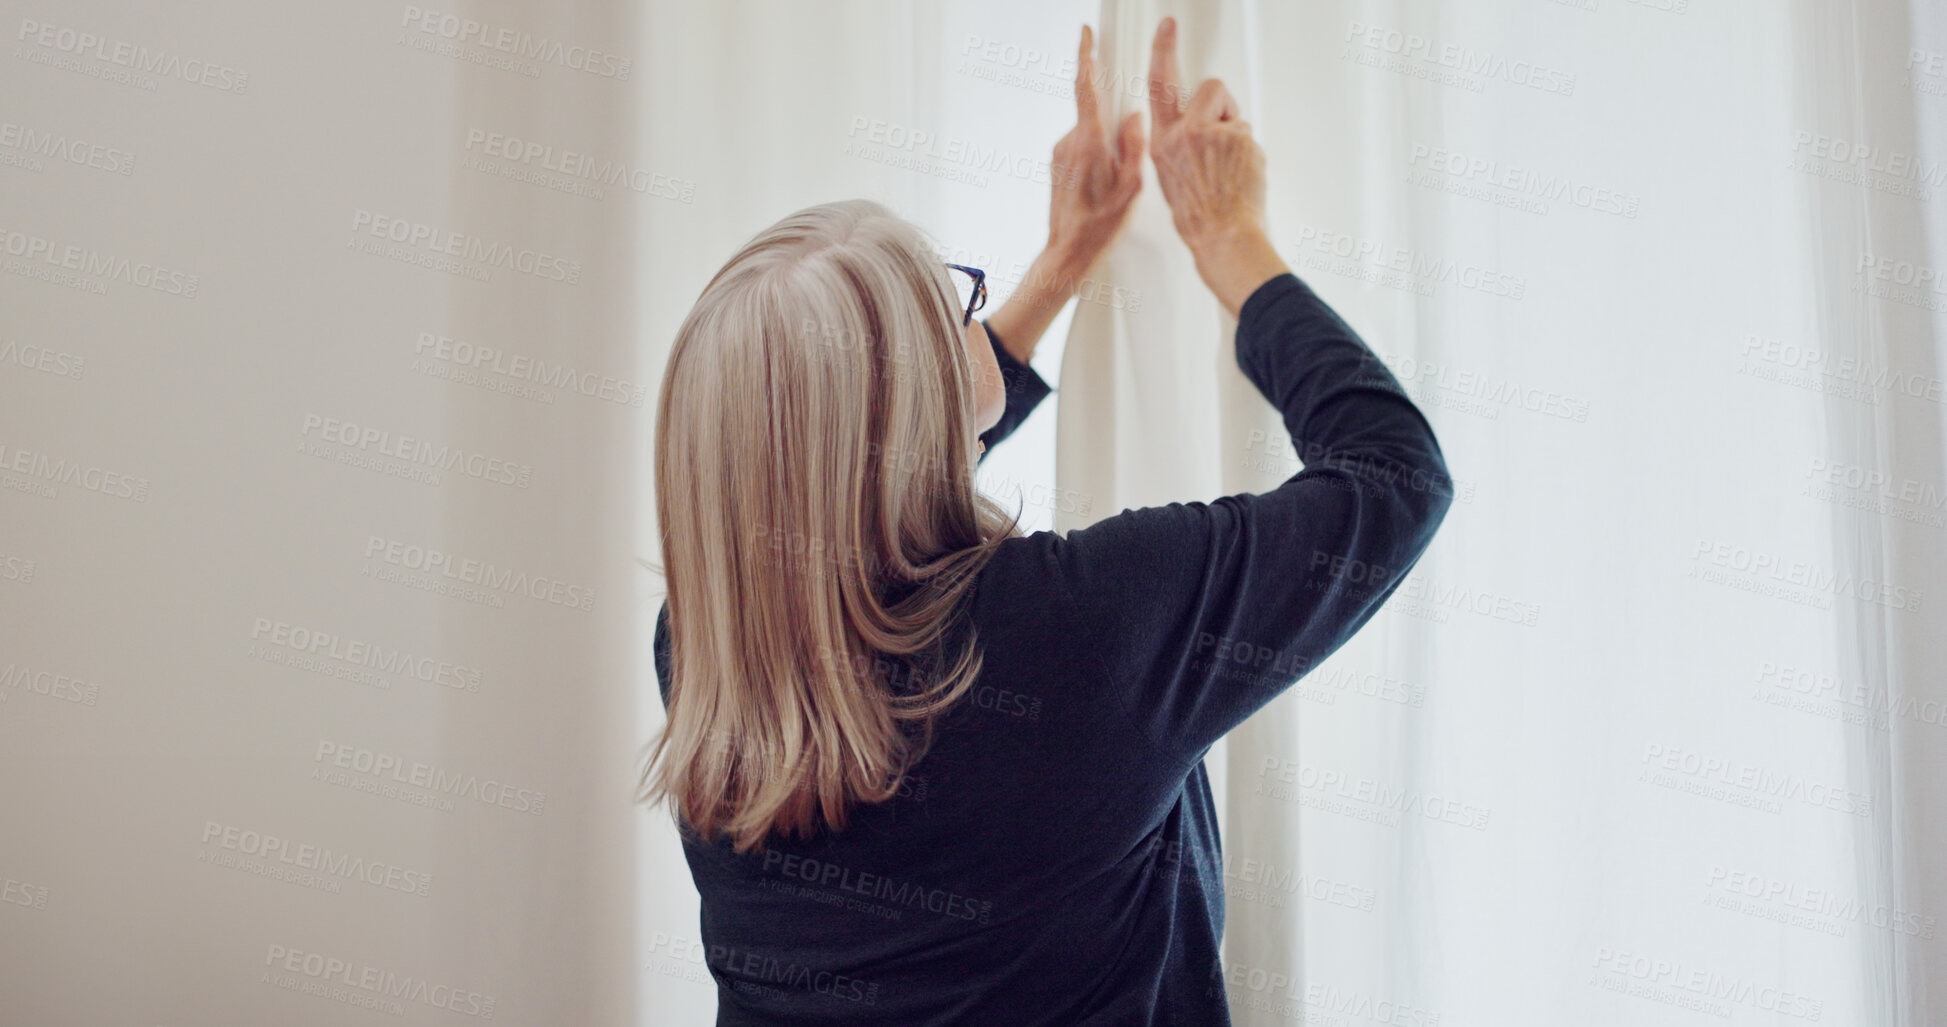 Buy stock photo Senior woman in home, opening curtains and getting ready for the day with sun, light and fresh air. Morning routine, retirement and elderly person at window in apartment, housework and chores in room